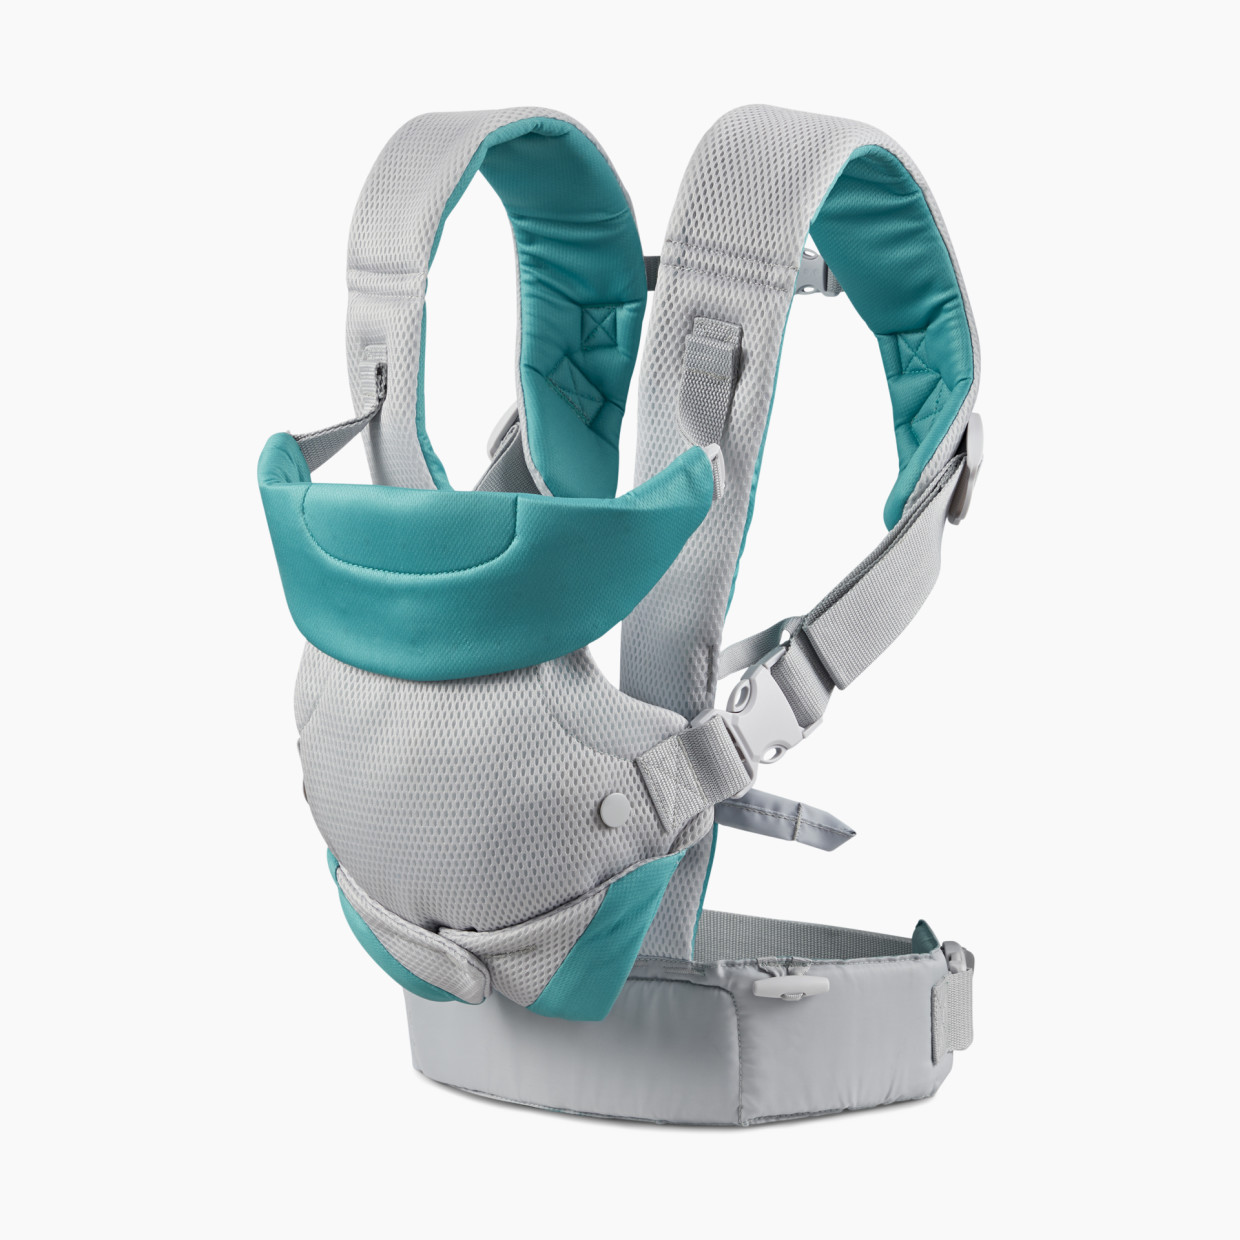 Infantino Flip 4-In-1 Convertible Carrier - Grey/Teal.